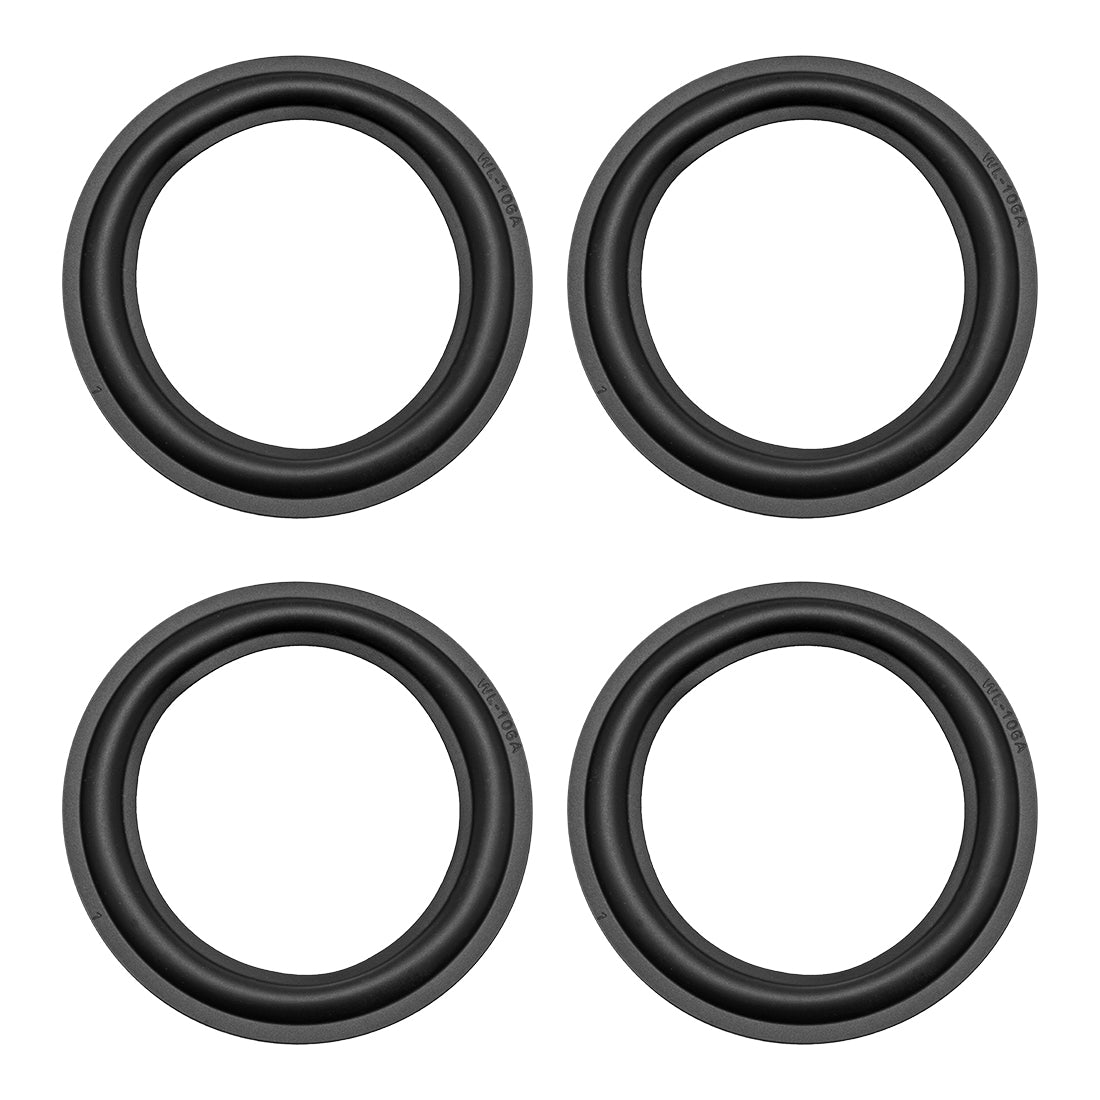 uxcell Uxcell 4.5 inch Speaker Rubber Edge Surround Rings Replacement Parts for Speaker Repair or DIY 4pcs